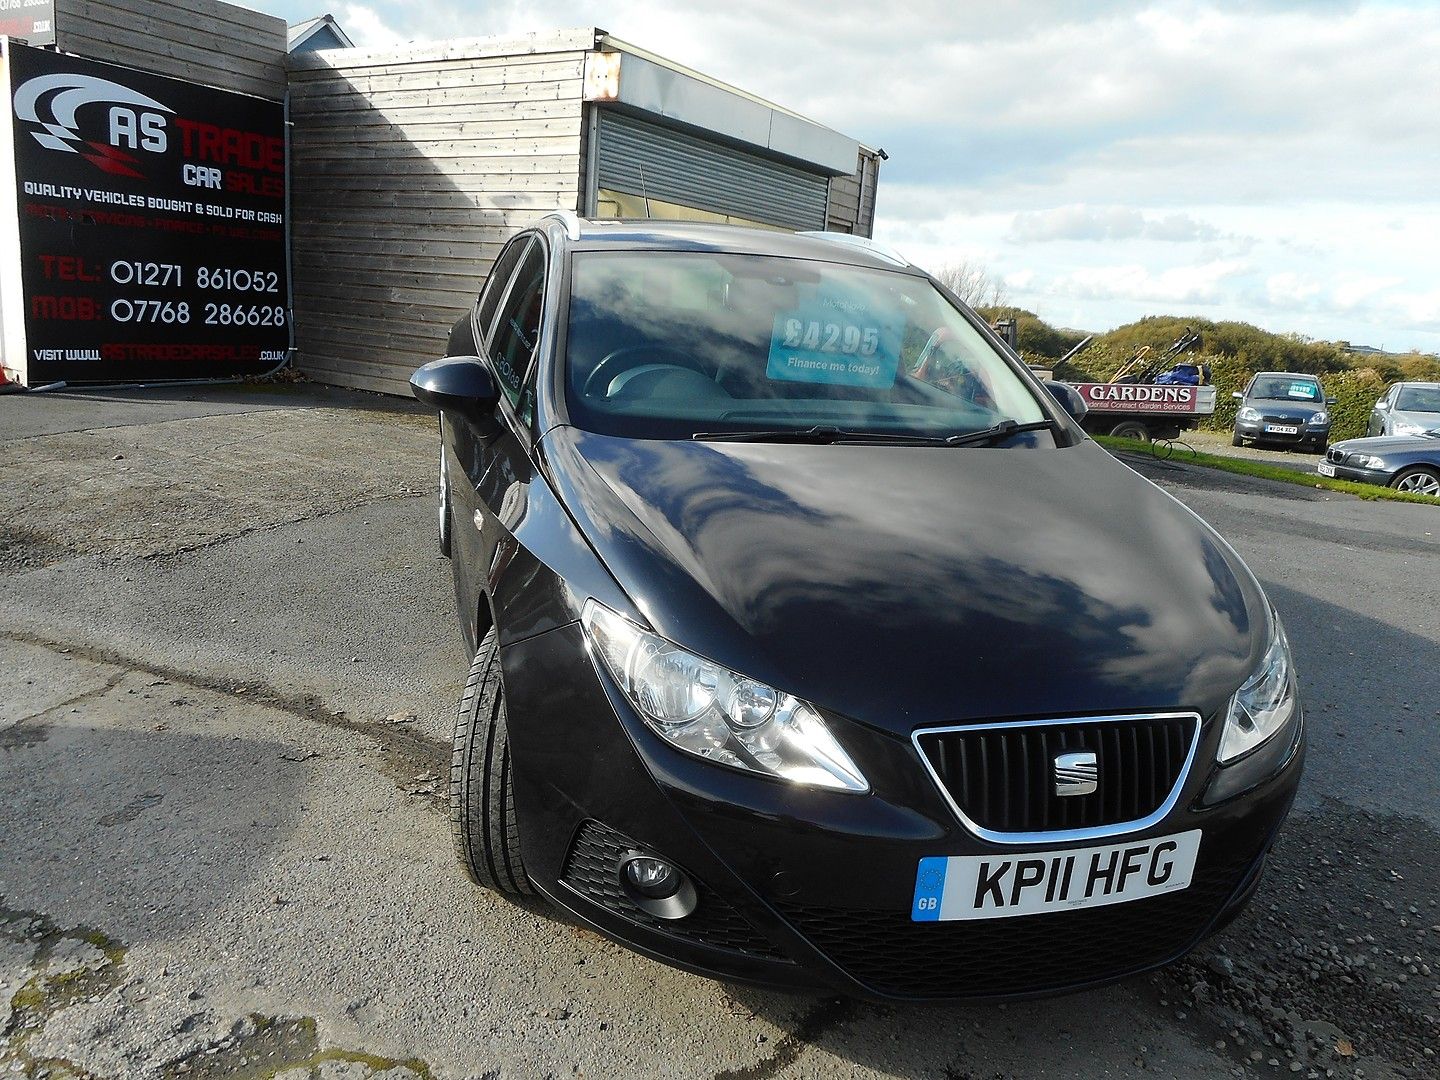 Ontstaan Verwachting verdamping SEAT Ibiza ST 1.4 16v 85PS SE Copa (2011) For Sale in Barnstaple, Devon | A  S Trade Car Sales